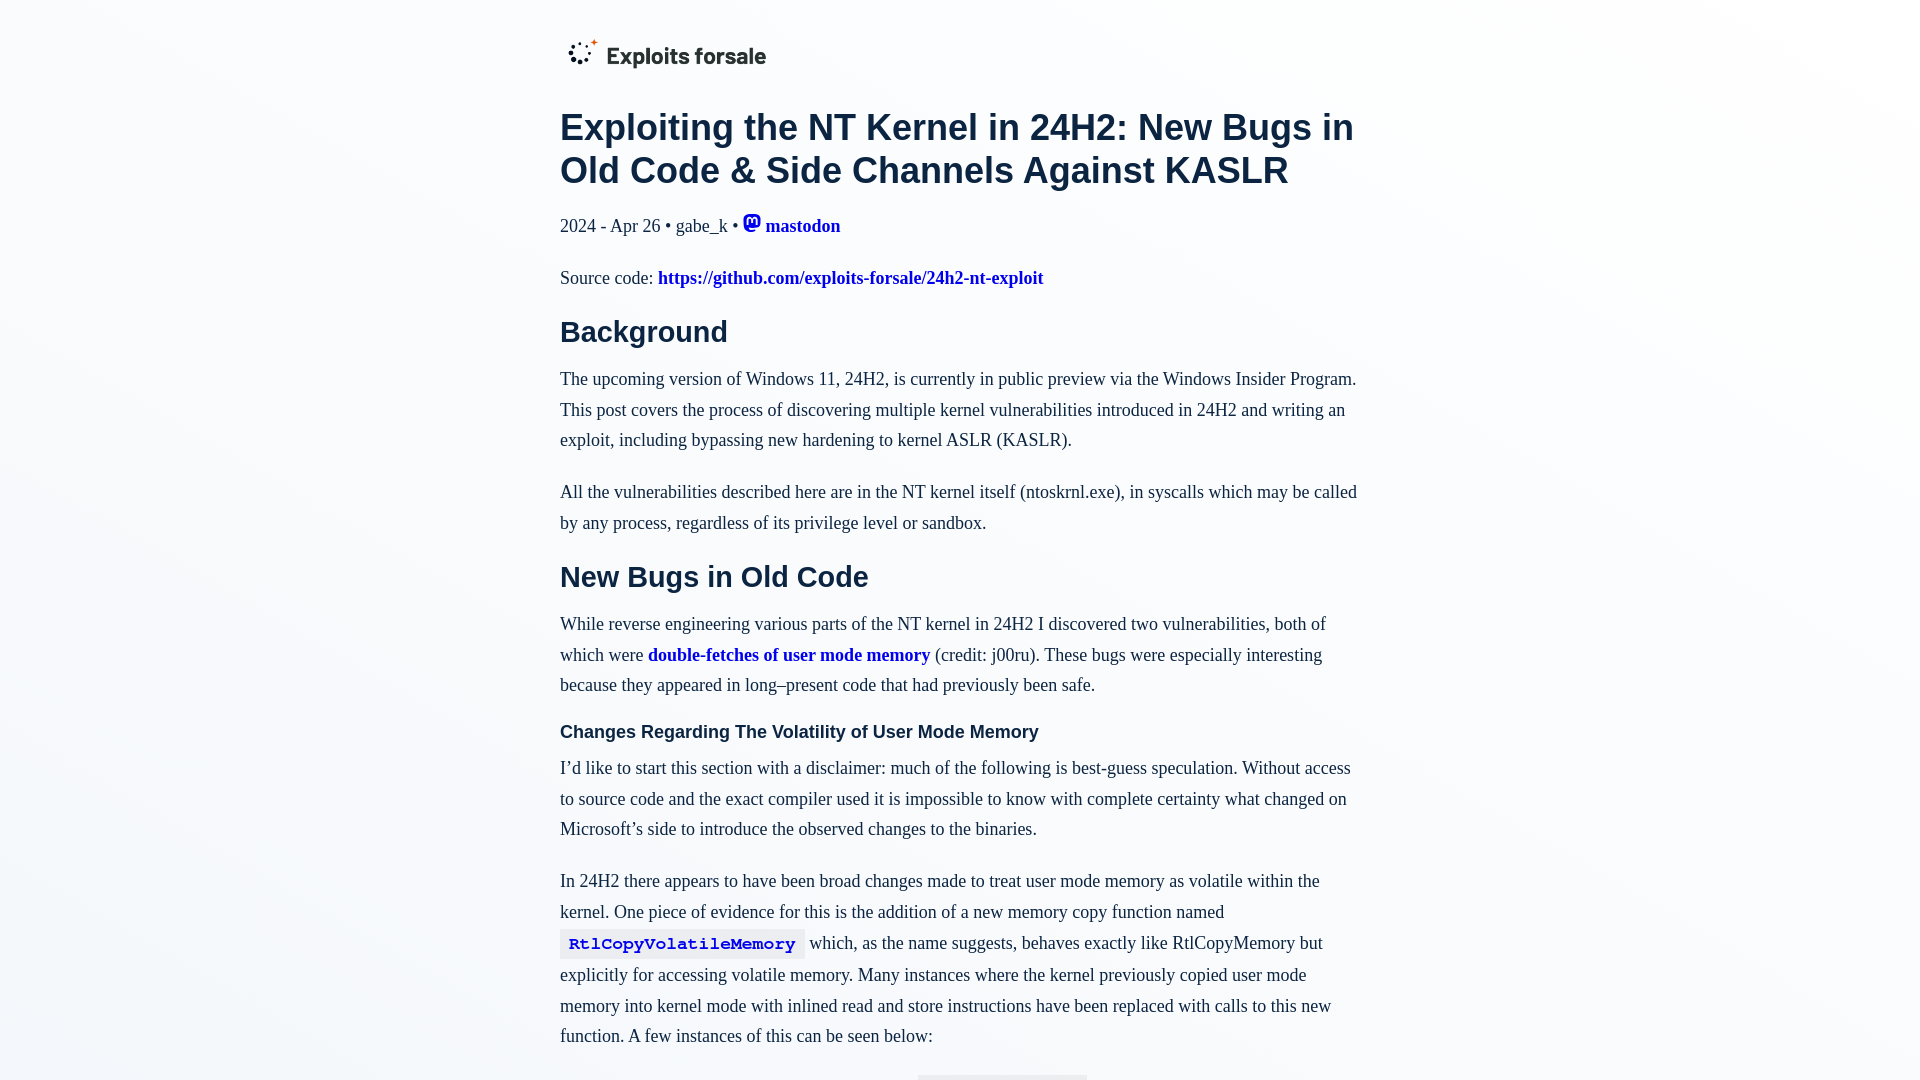 Exploiting the NT Kernel in 24H2: New Bugs in Old Code & Side Channels Against KASLR